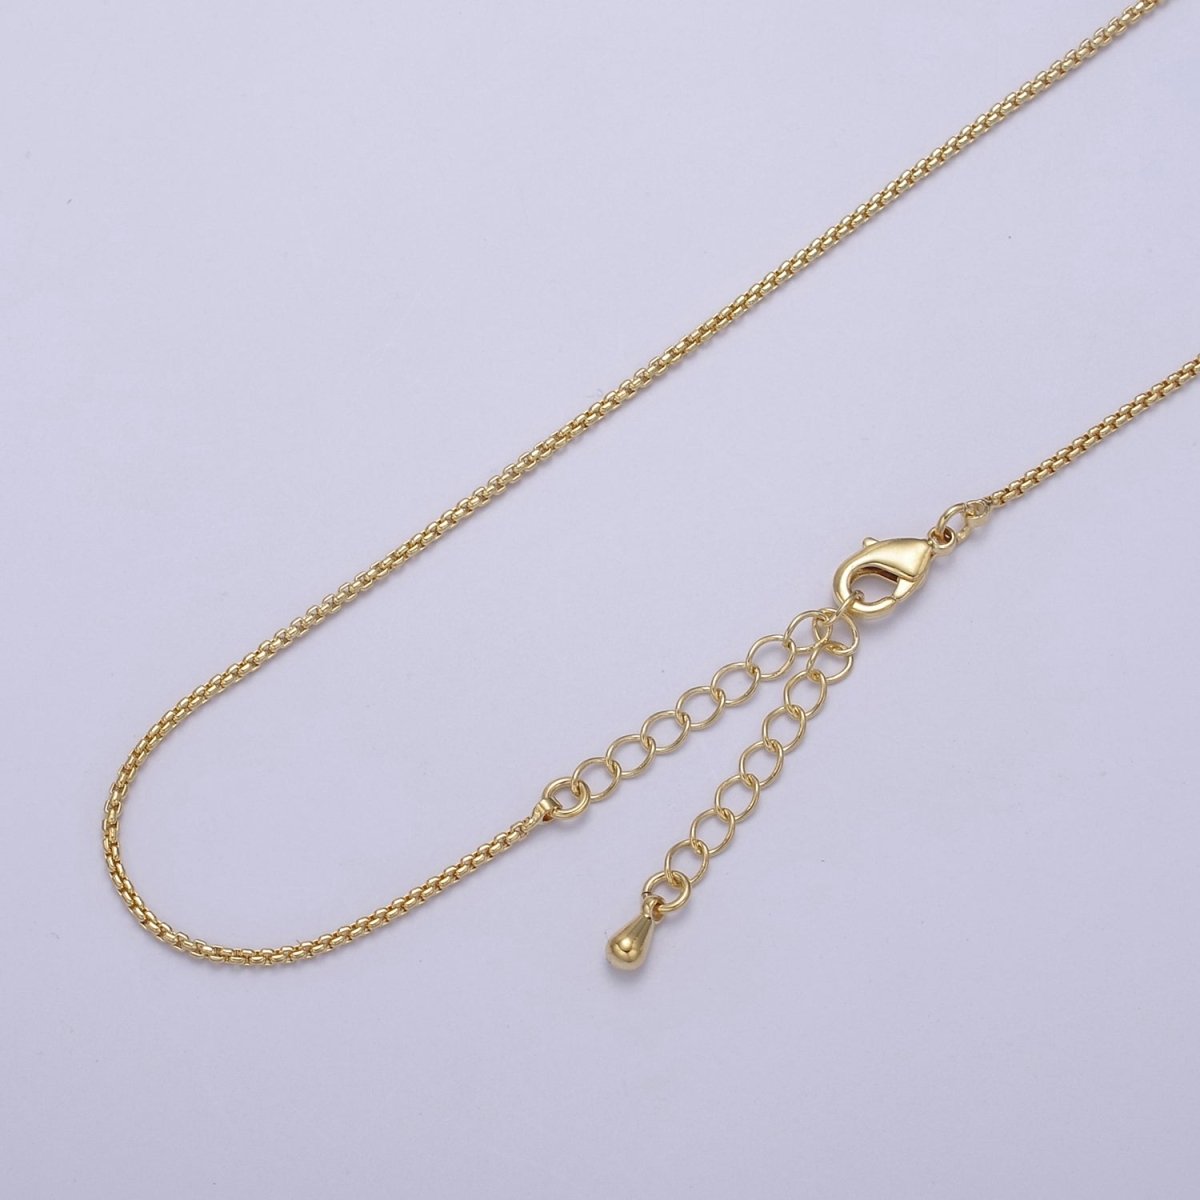 Dainty 14k Gold Filled Rolo Chain Necklace 1.3 mm ROLO Link Chain Jewelry Making Women Necklace 17.7" w/ 2 " extender | WA-725 Clearance Pricing - DLUXCA